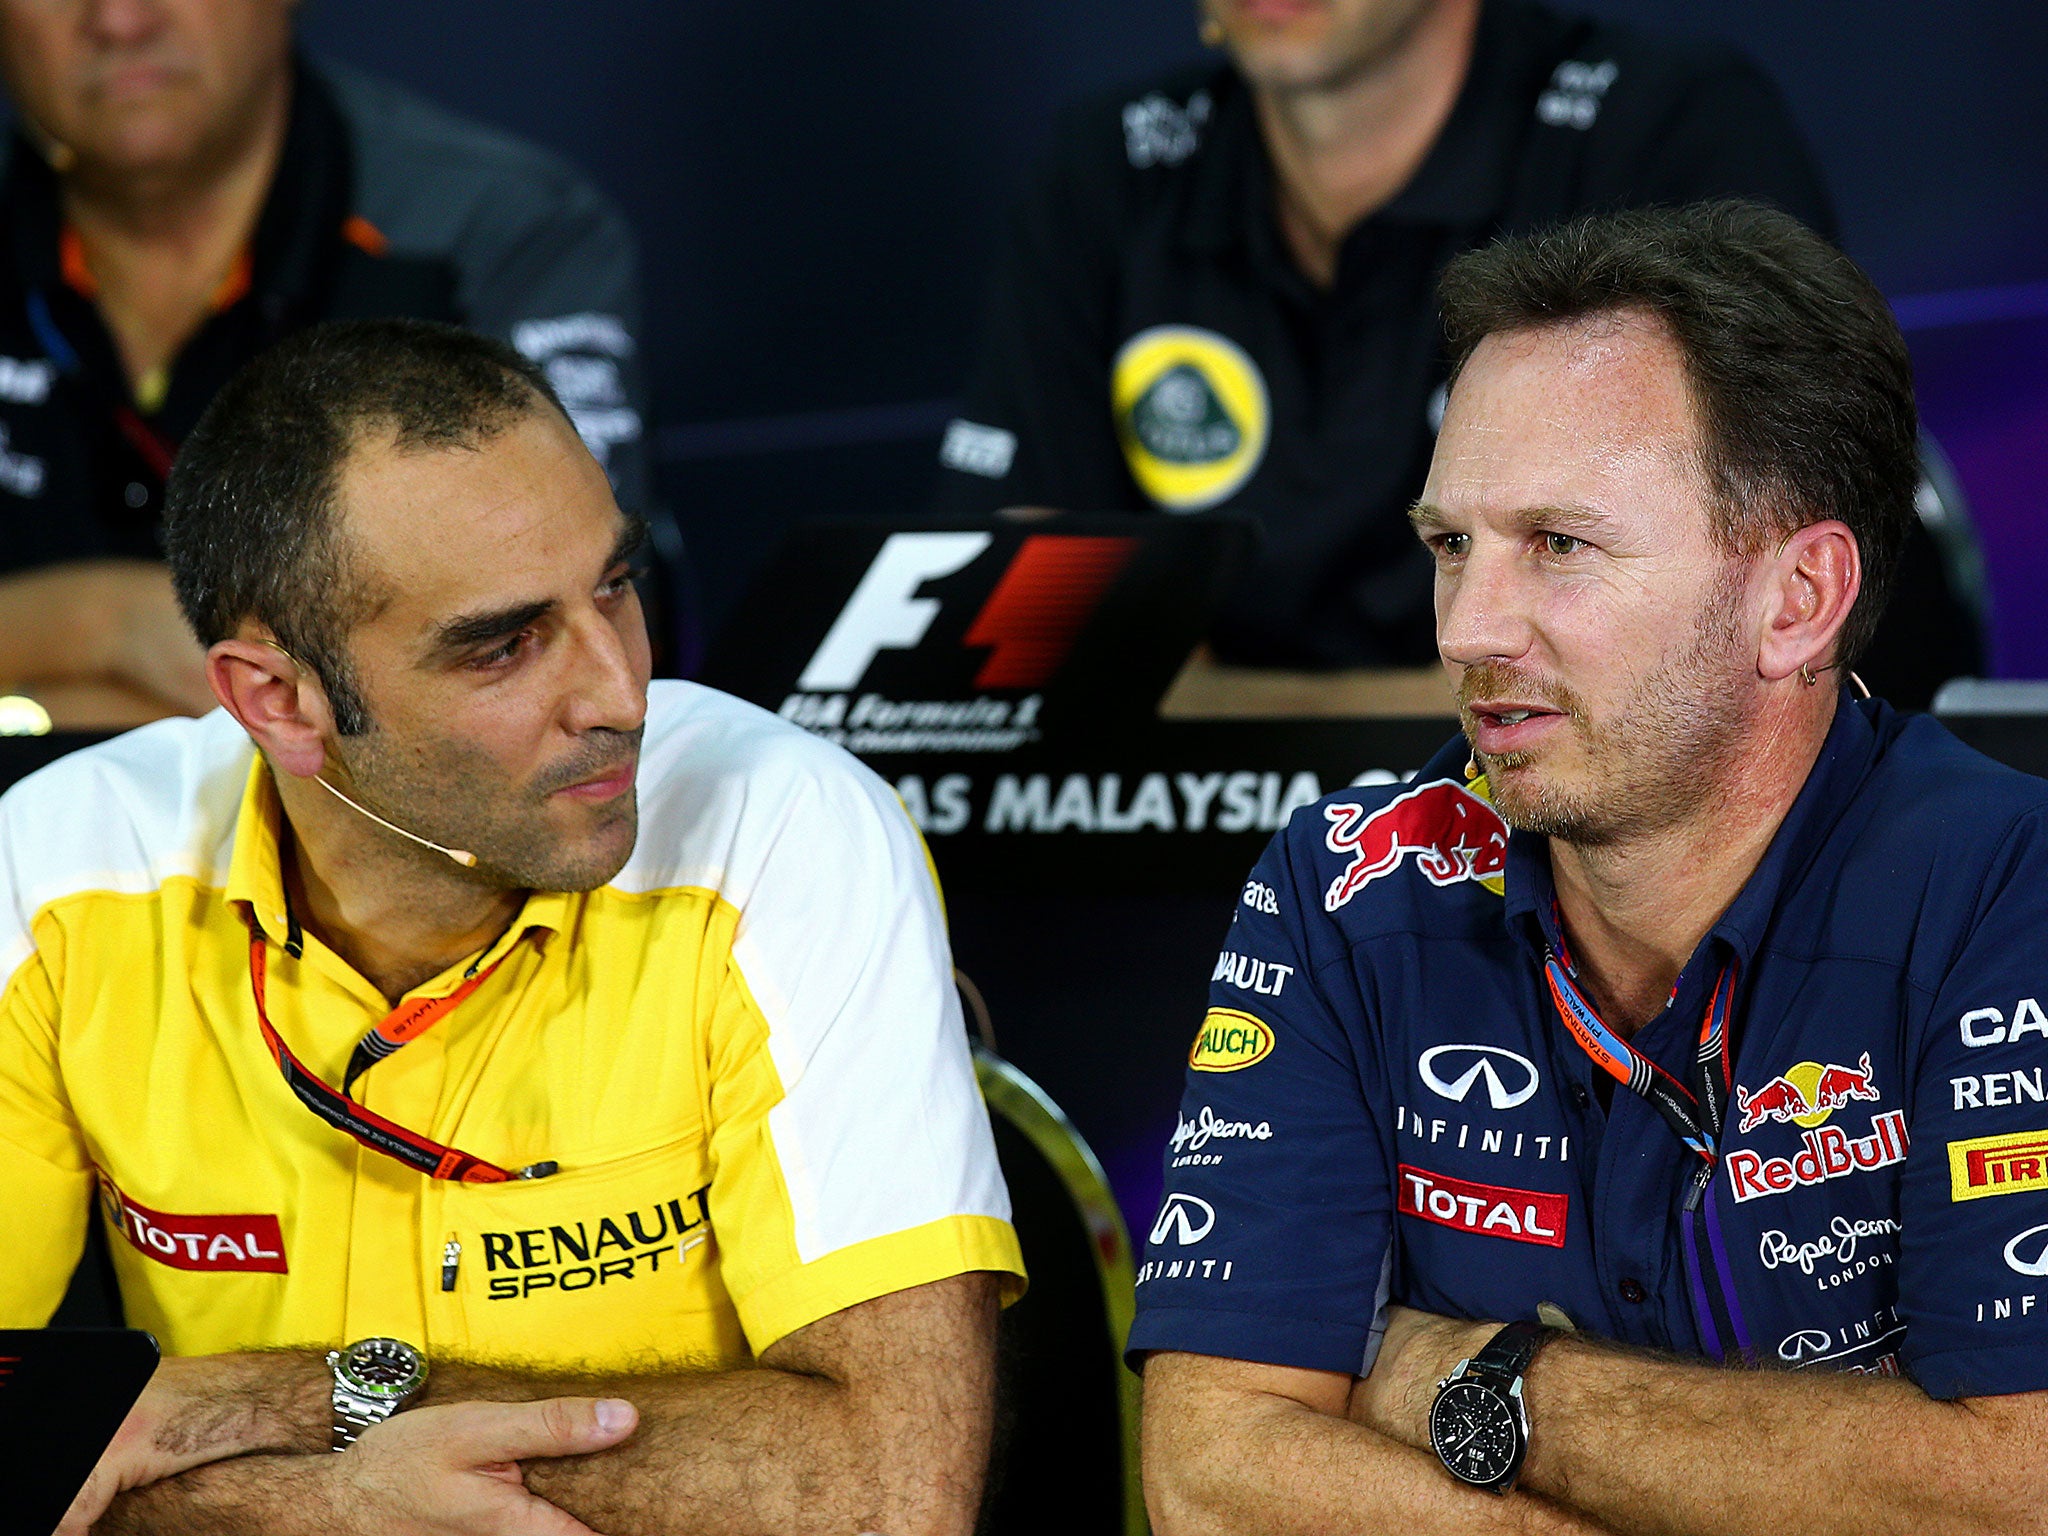 The ugly split between Renault and Red Bull is unlikely to trigger a reunion